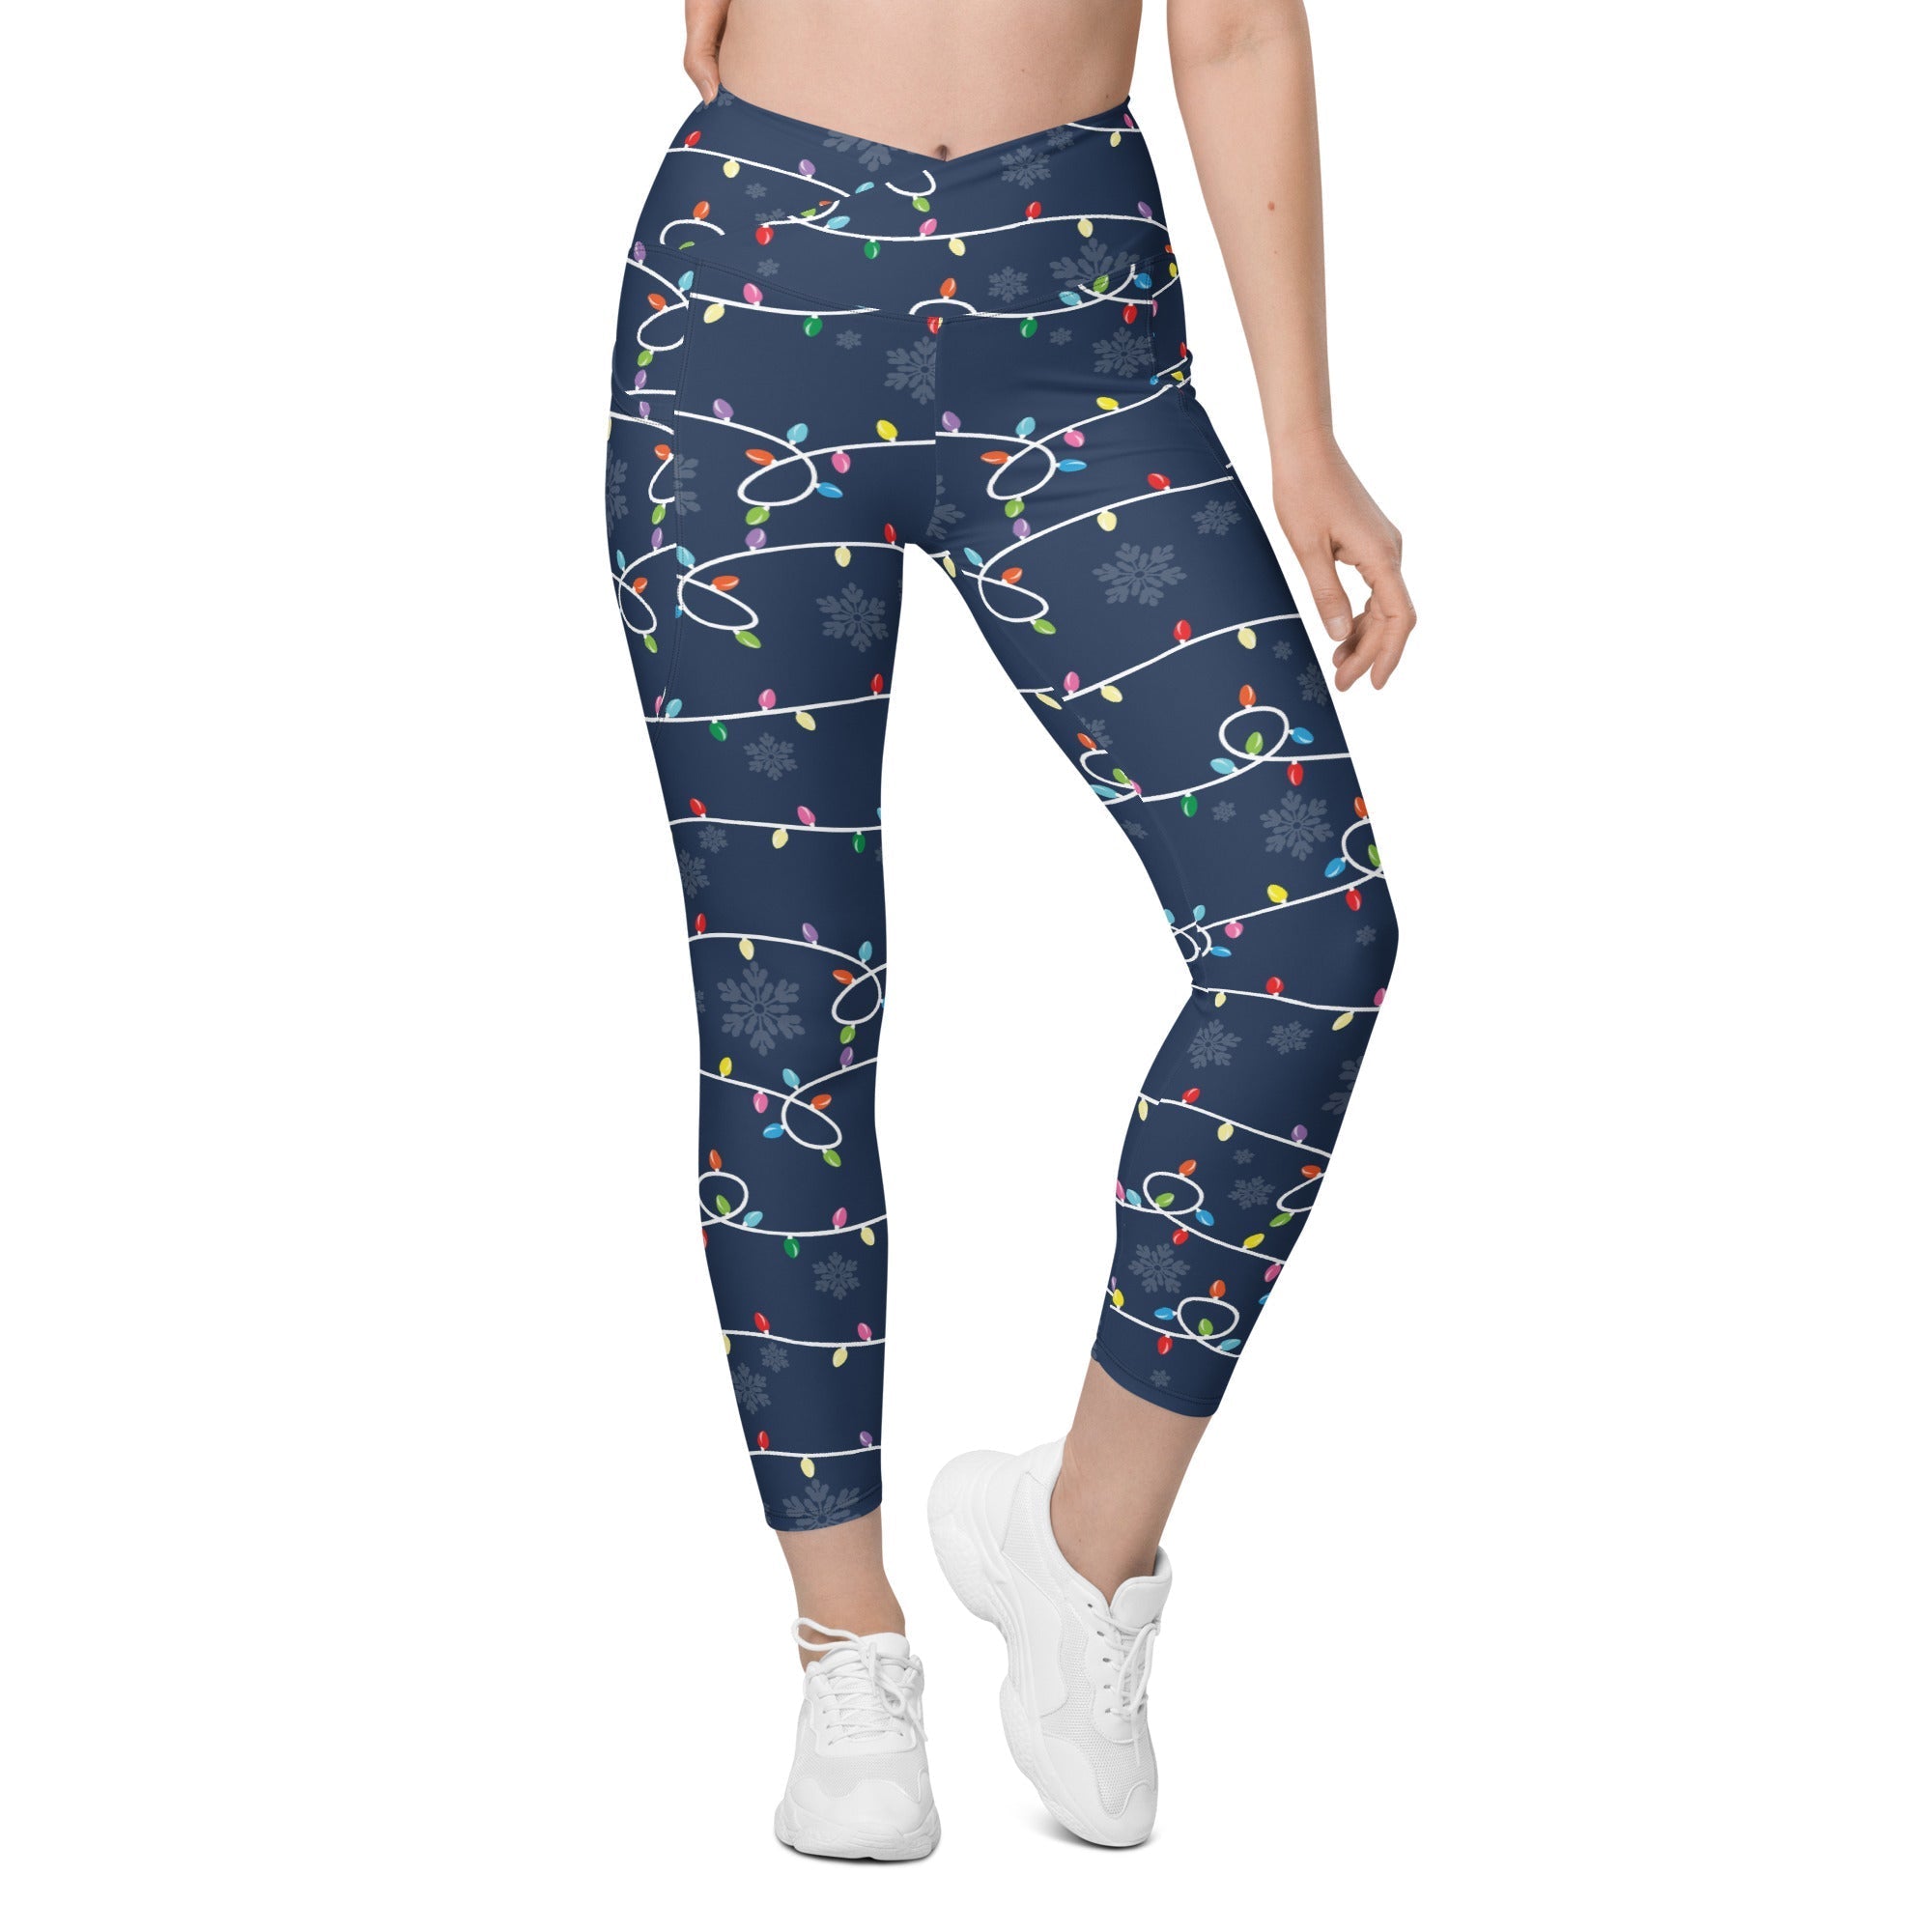 Queenish Mentality” Crossover leggings with pockets - TJM Collection